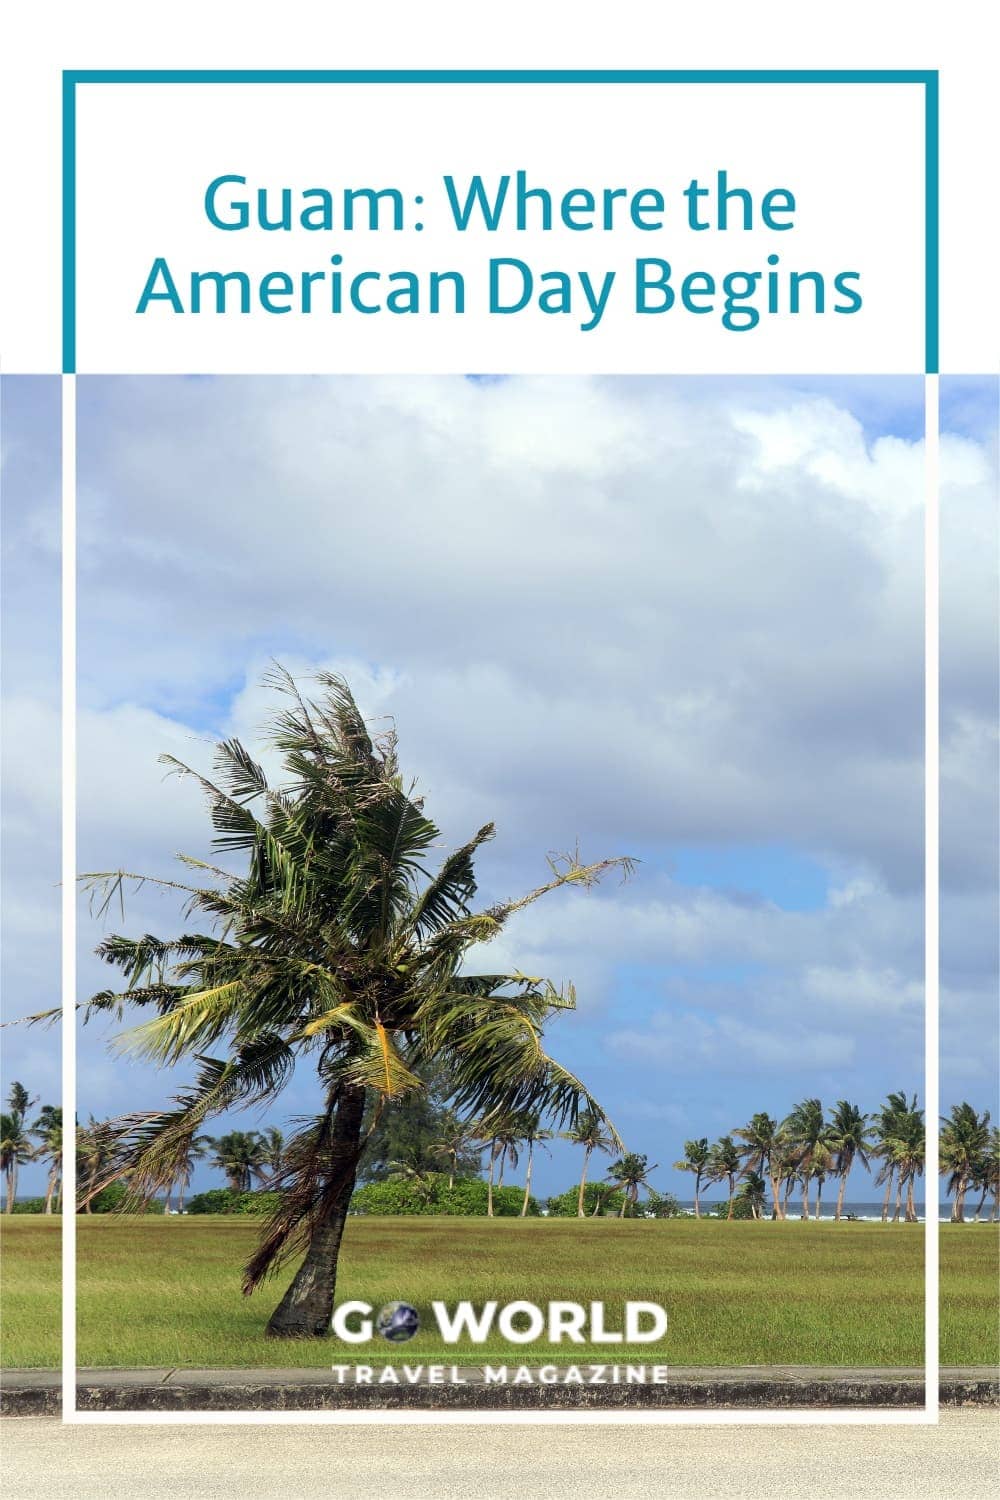 Guam: Where the American Day Begins